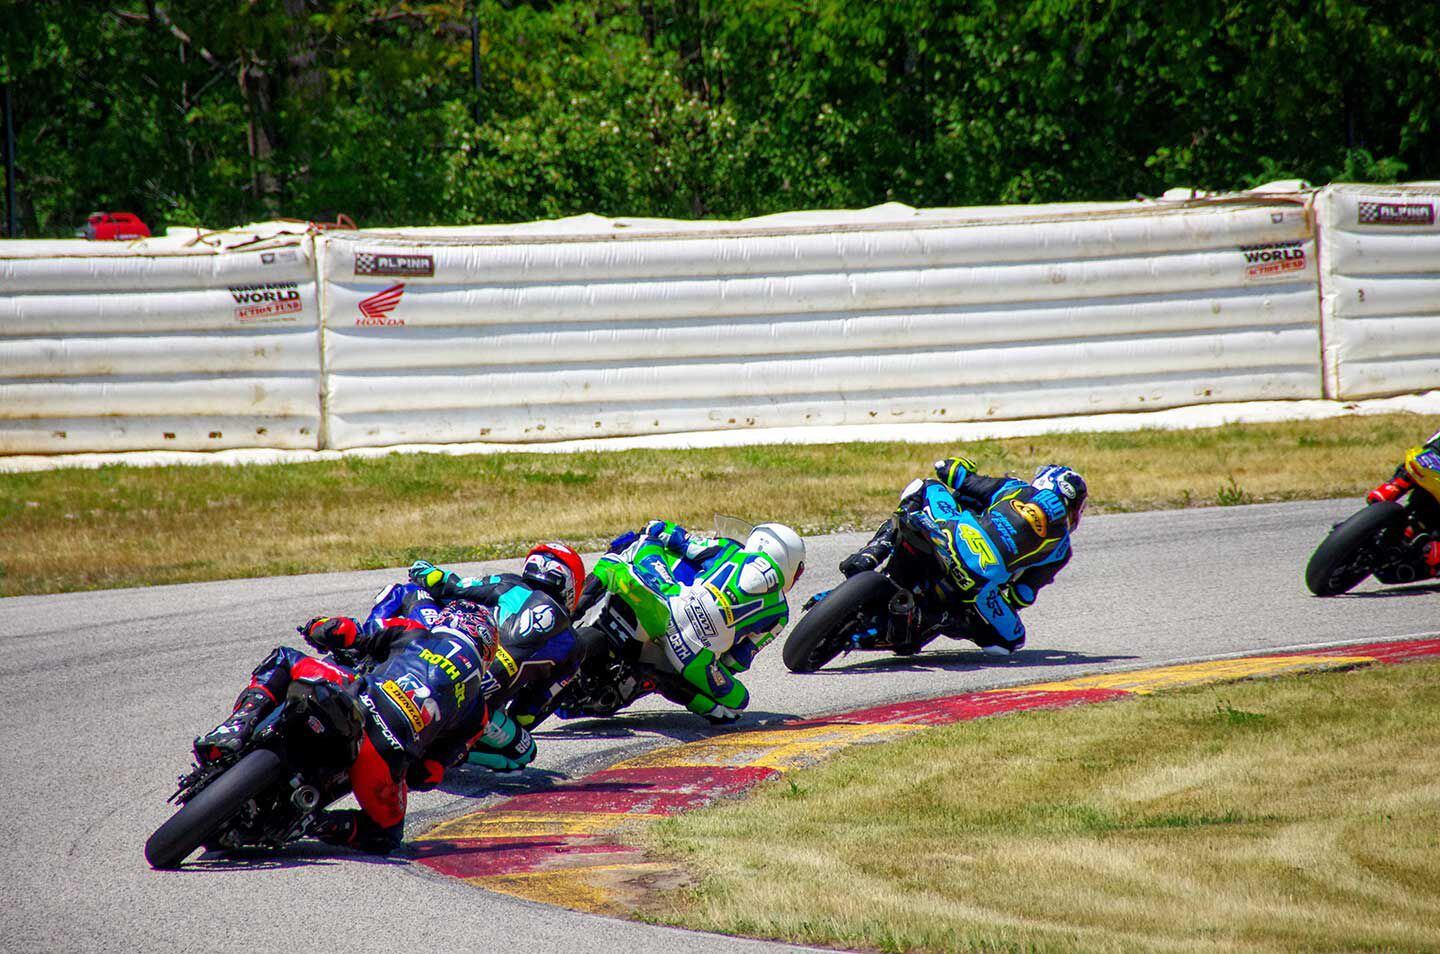 Saturday’s Junior Cup riders negotiating the Kink. Curiously, the Kink wasn’t repaved, unlike the rest of the Road America track surface.